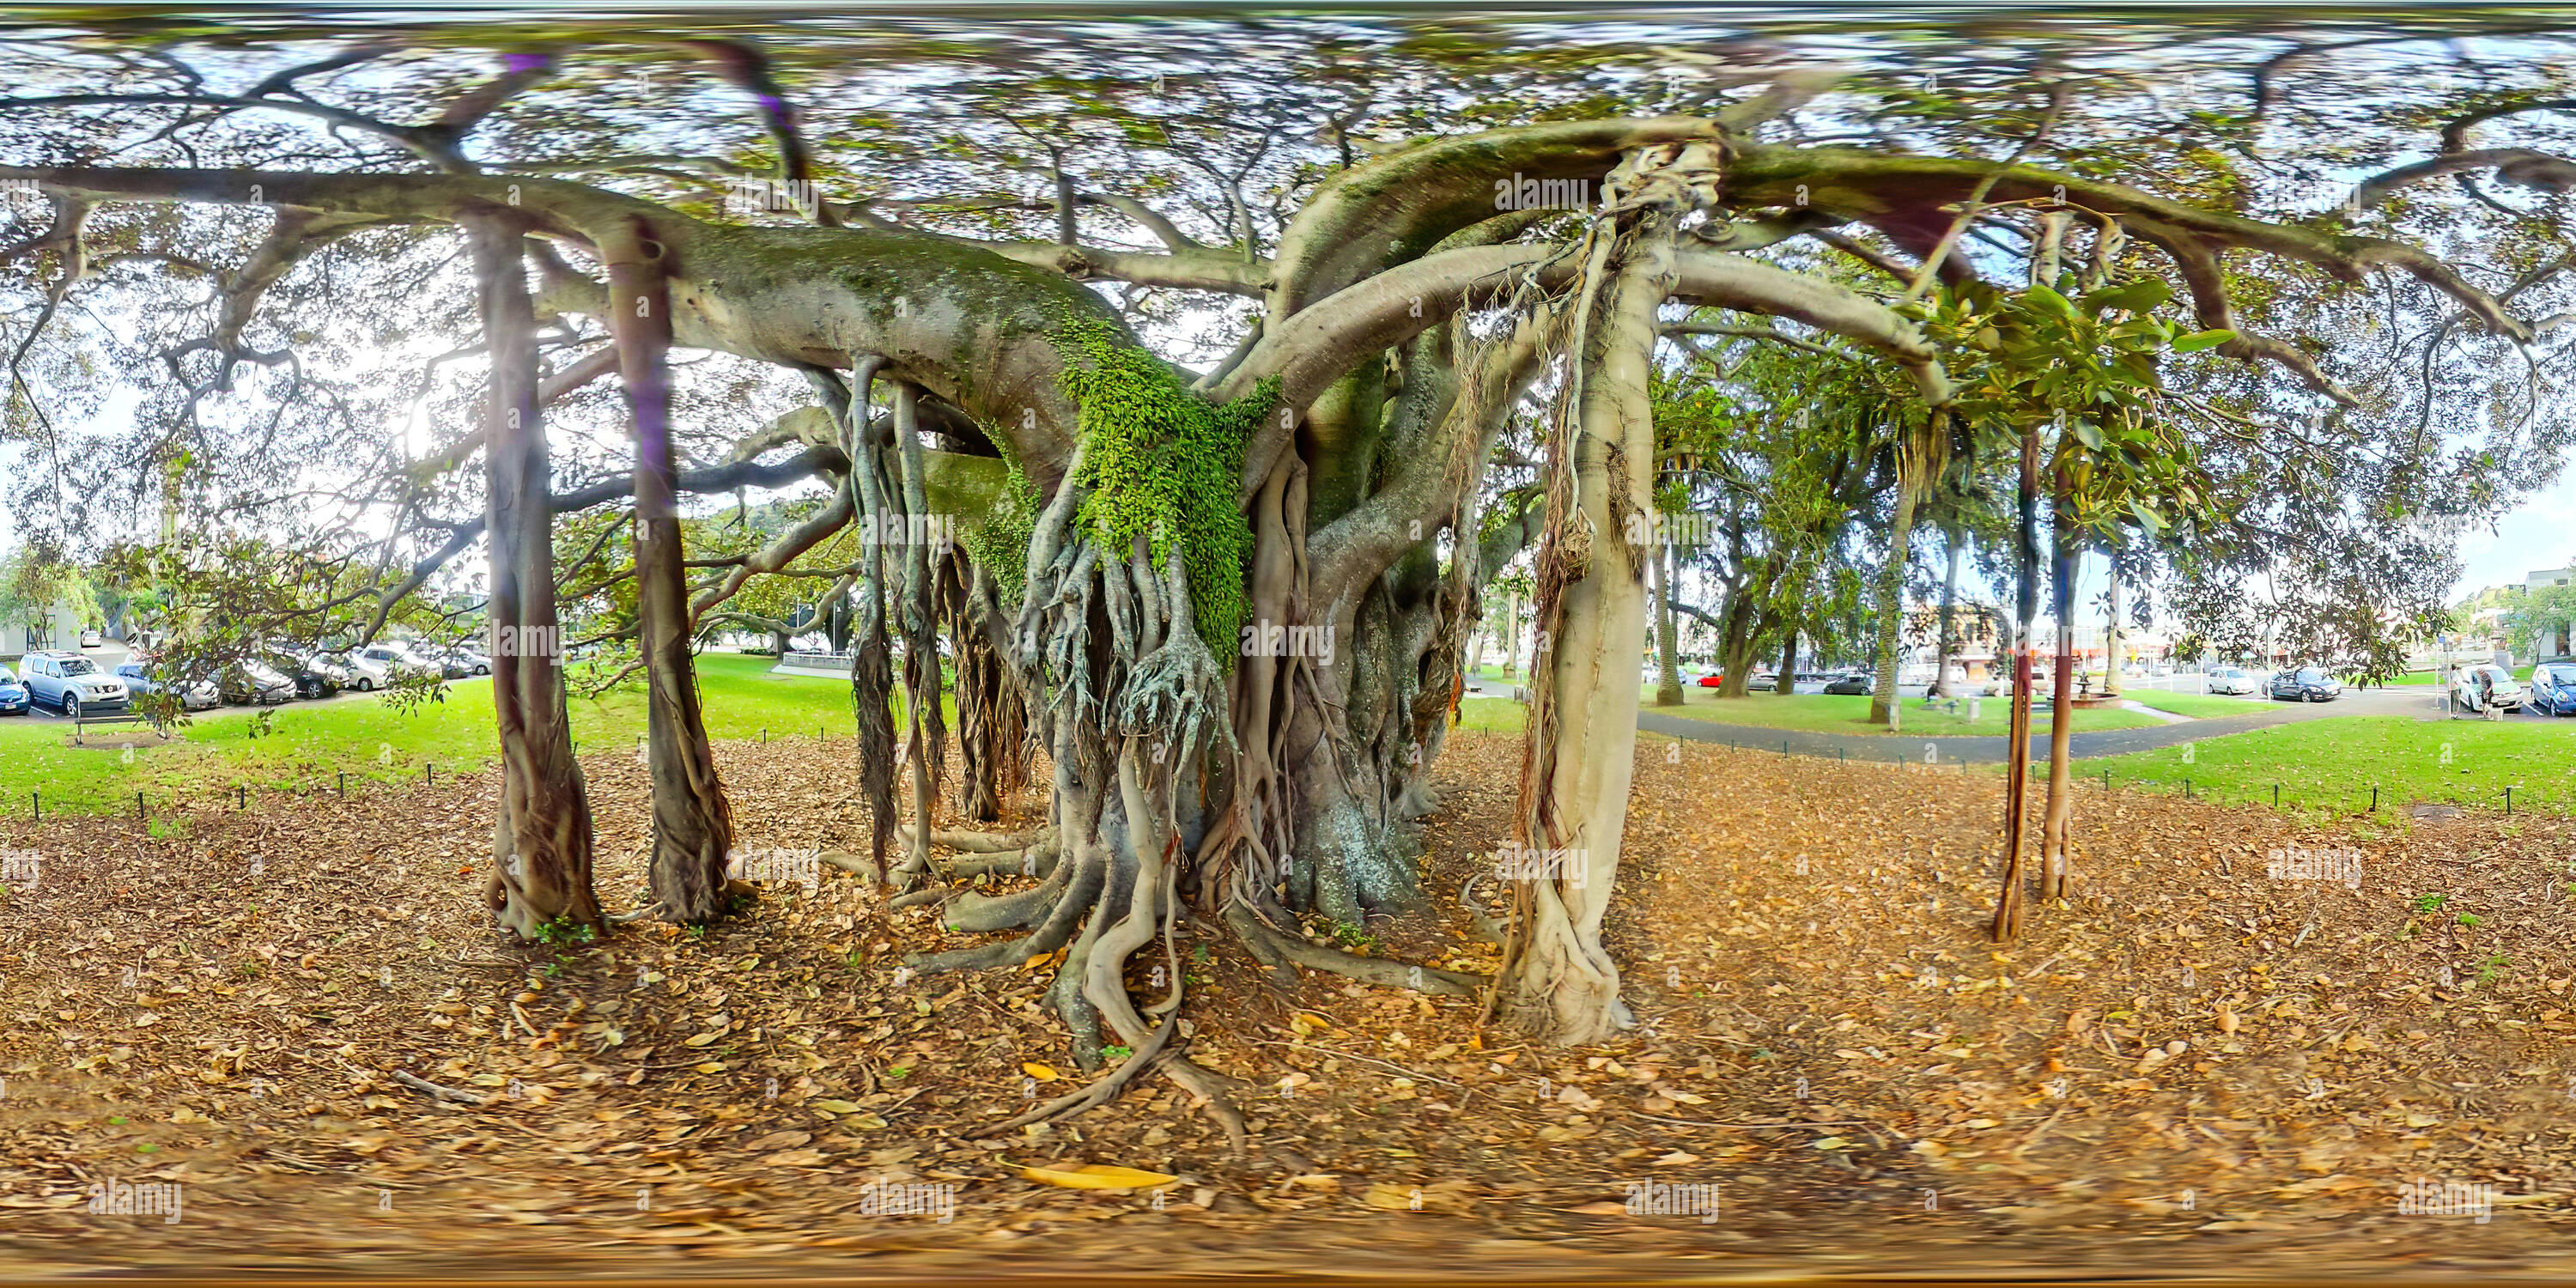 360 degree panoramic view of Moreton Bay Fig Tree, Devonport, Auckland, New Zealand